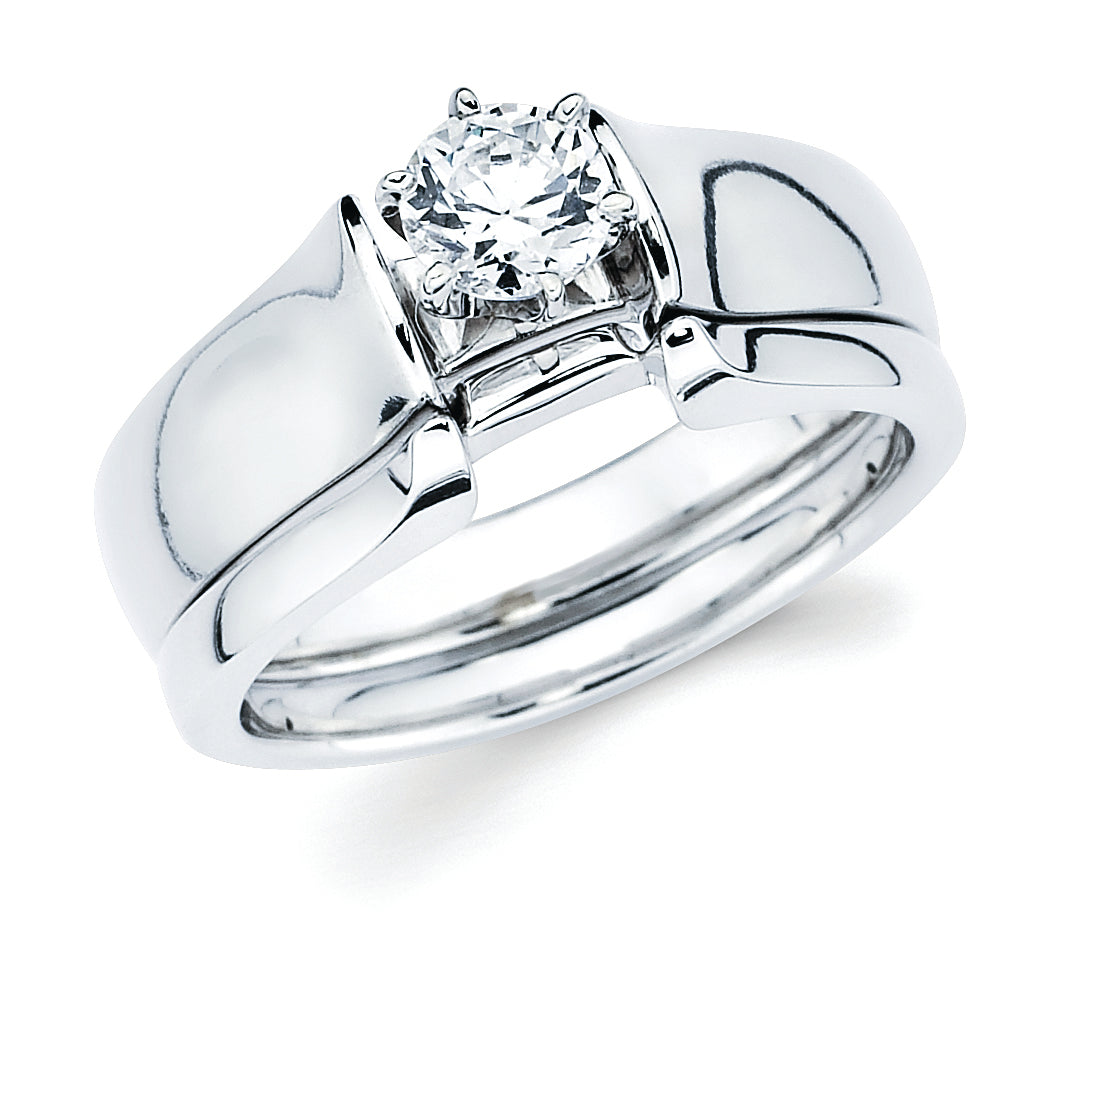 Classic Bridal: Diamond Ring shown with 1/2 Ct. Round Center Stone in 14K Gold